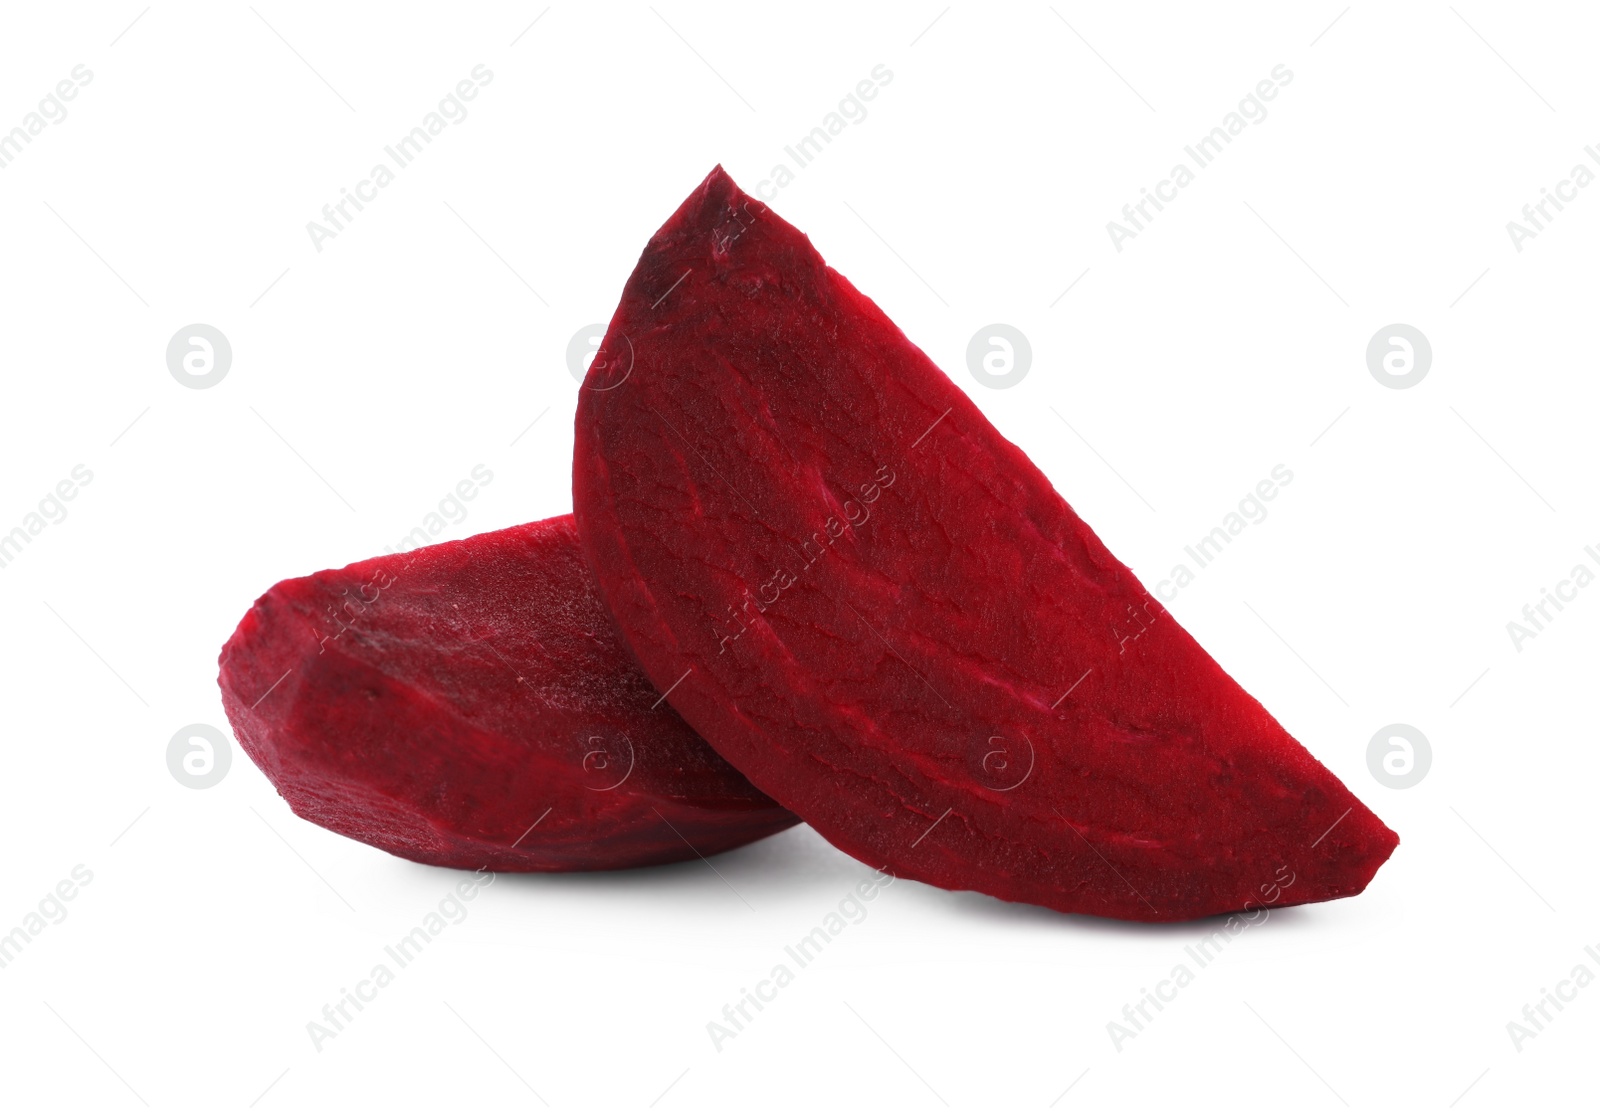 Photo of Cut fresh red beet isolated on white